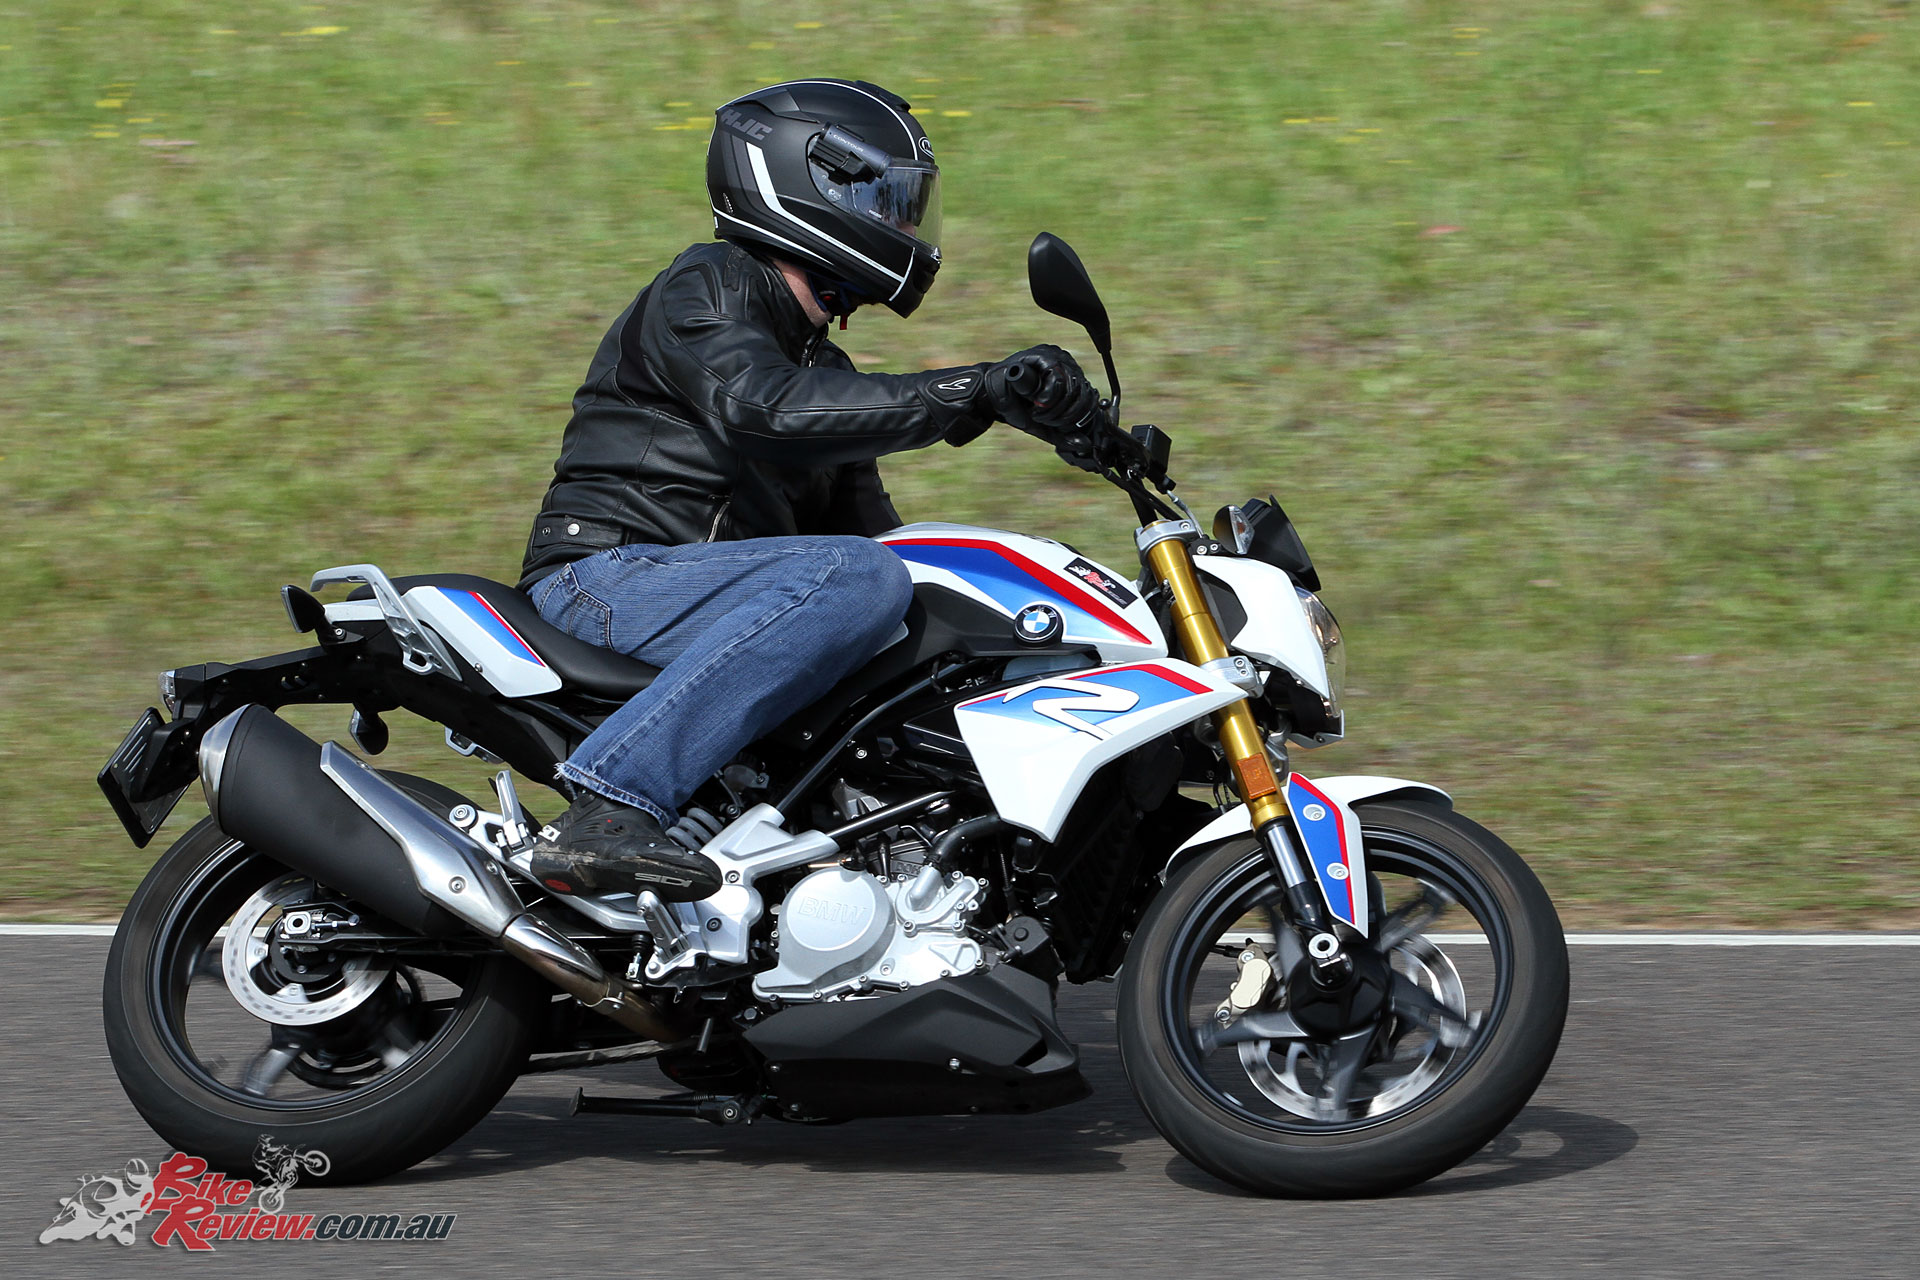 Review: 2017 BMW G 310 R LAMS Approved - Bike Review